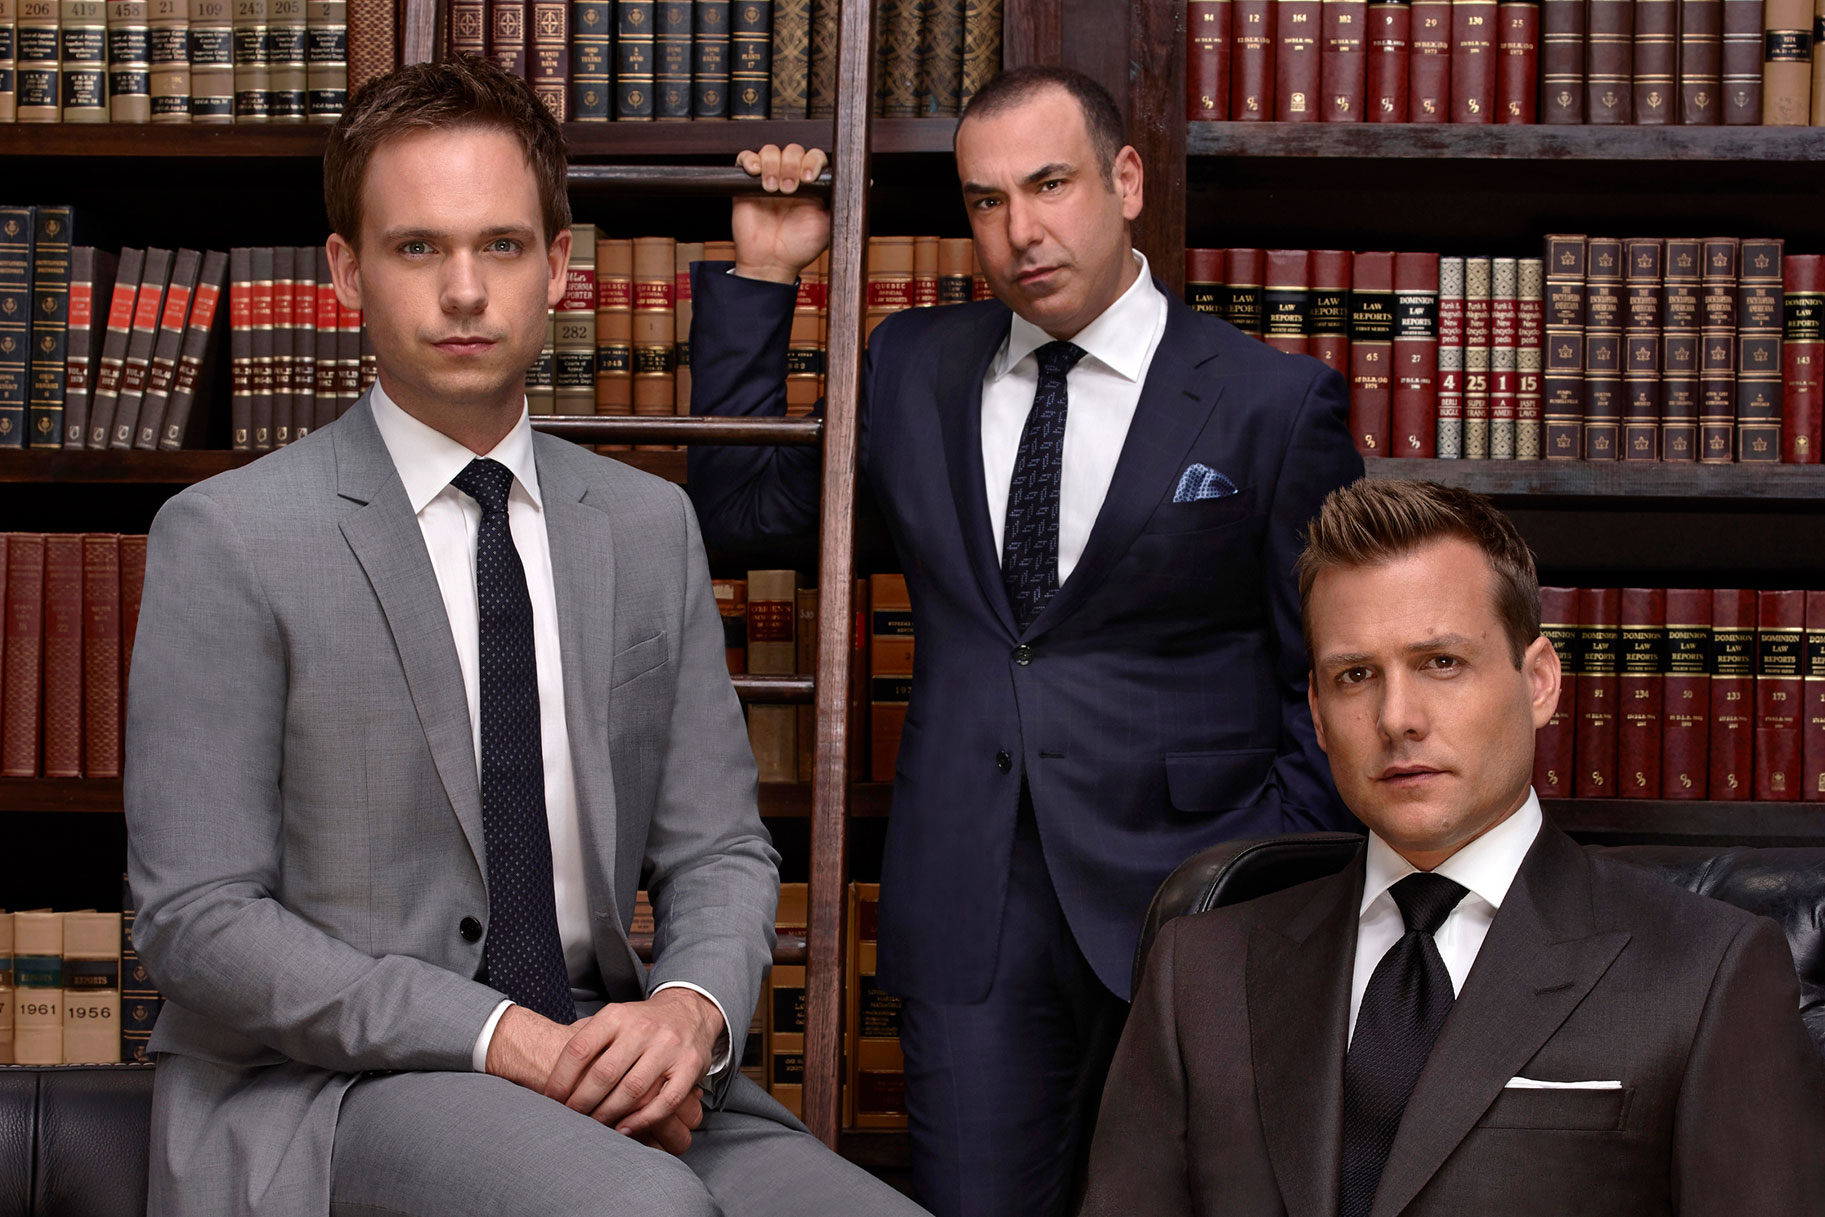 The cast of 'Suits' posed in a law library